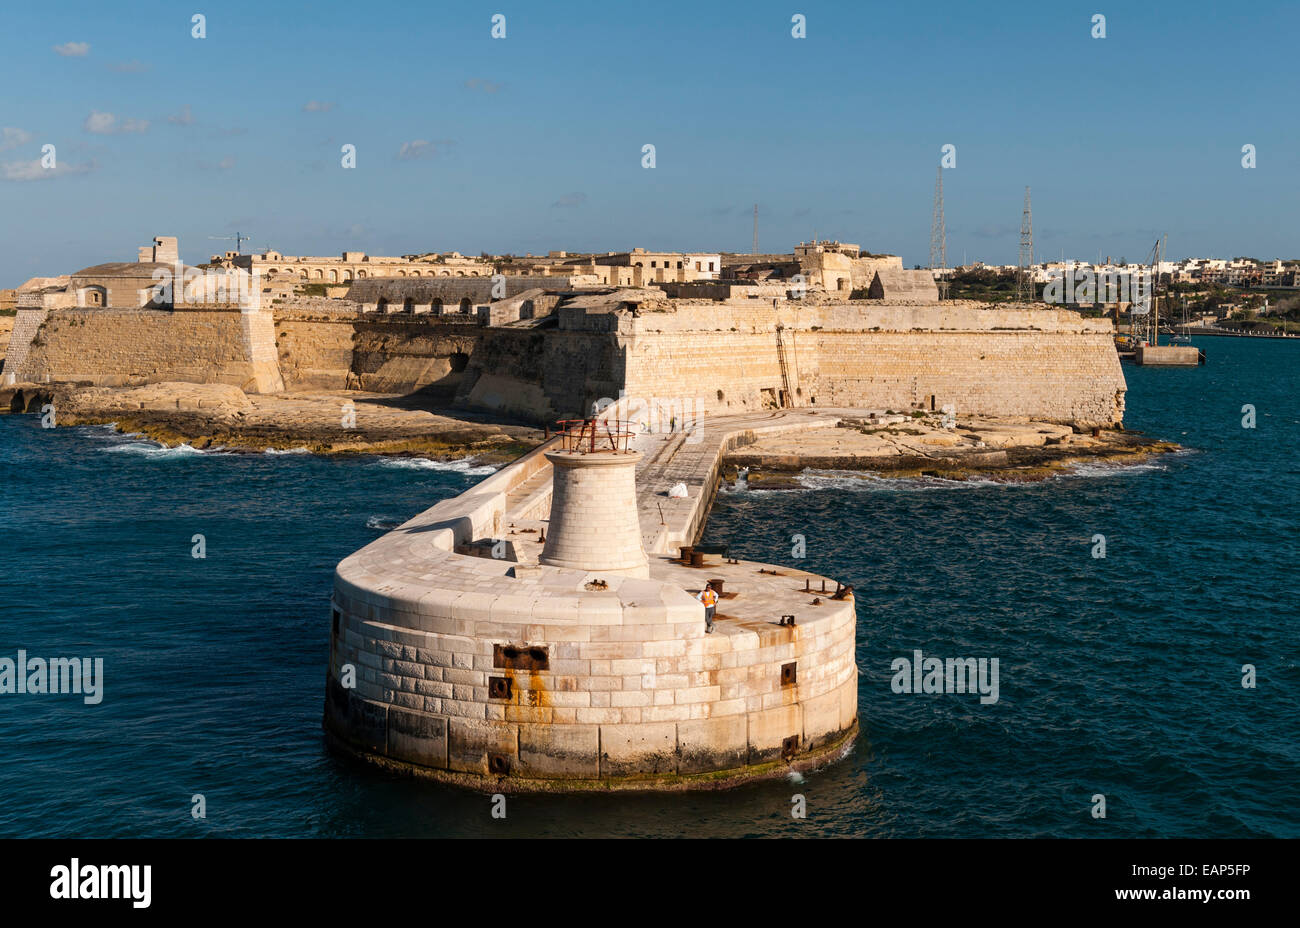 Valletta, Malta - entrance to the Grand Harbour. The Ricasoli lighthouse and breakwater with Fort Ricasoli (Forti Ricazoli) Stock Photo